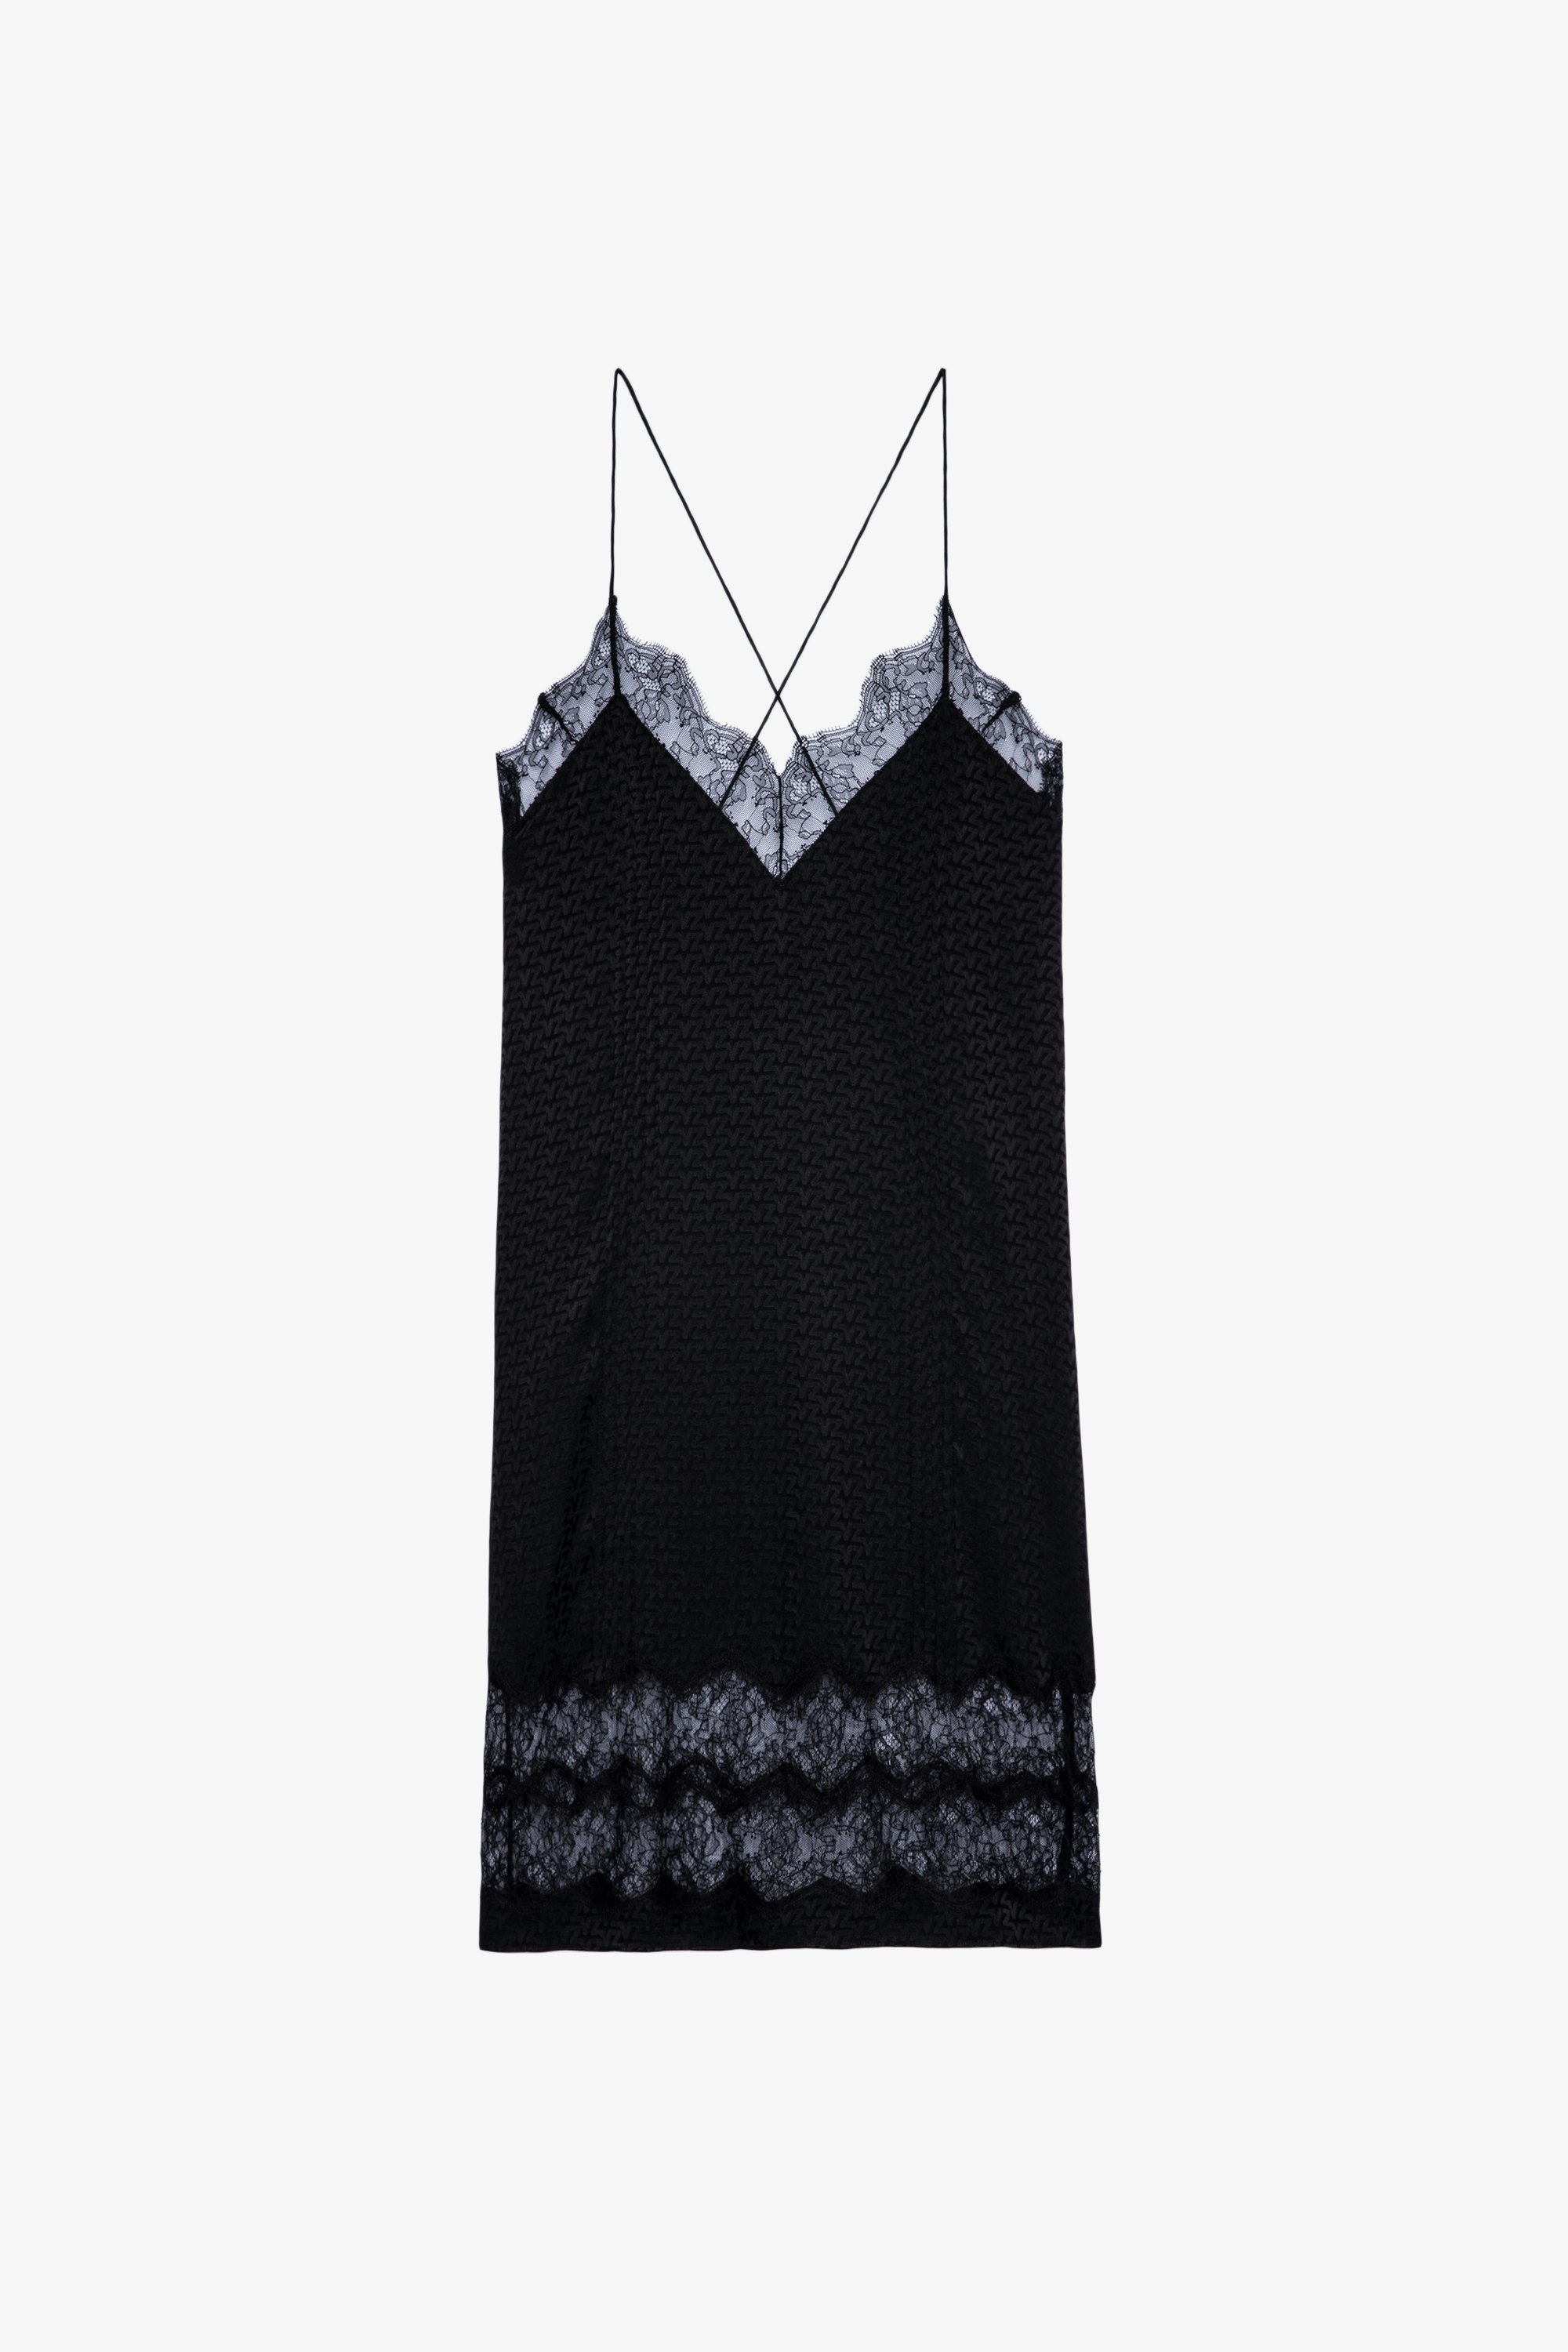 Crystal シルクワンピース Women's black silk dress with straps